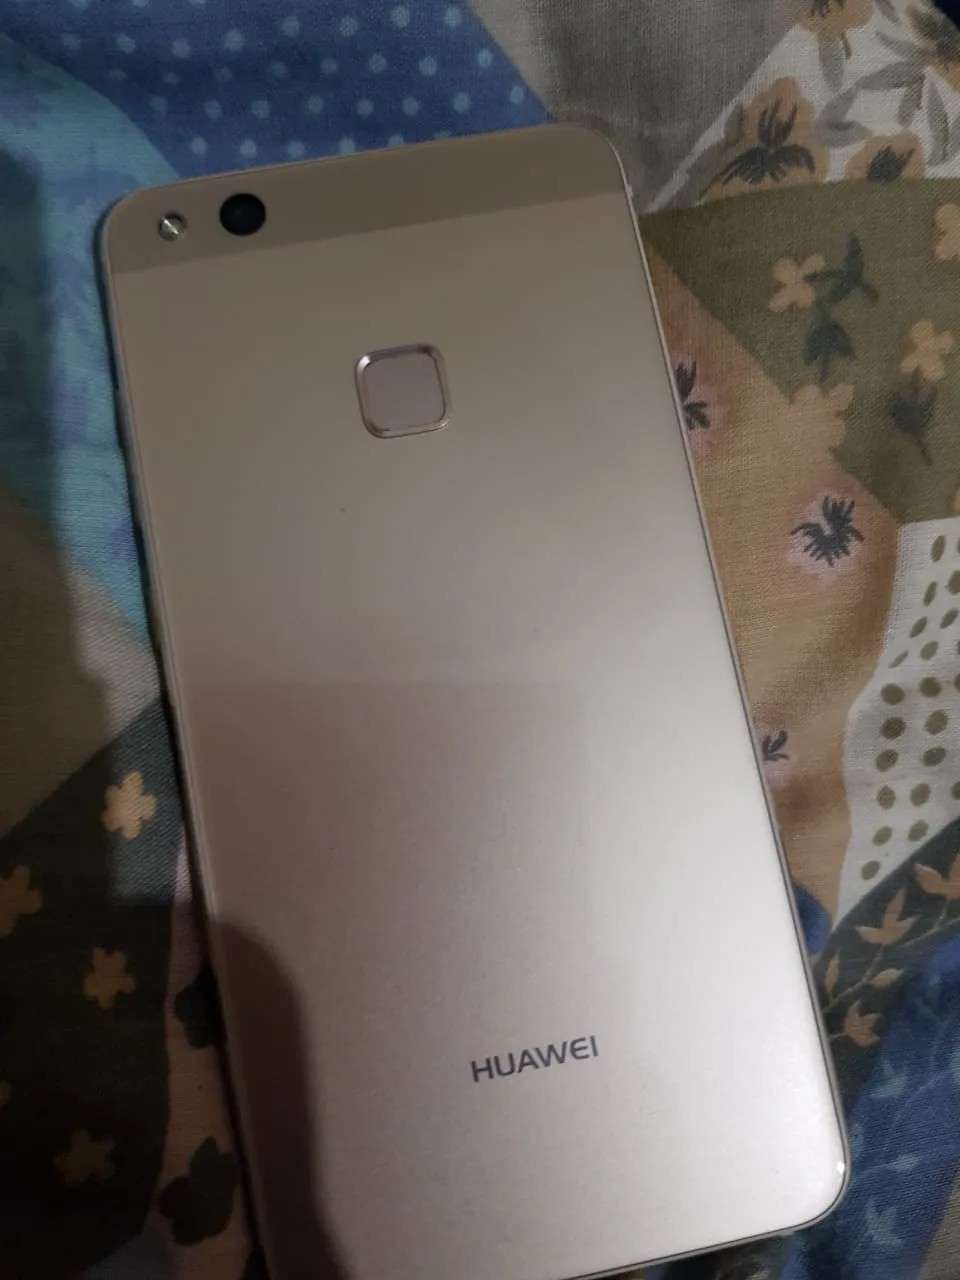 Huawei p10 lite available for sale - photo 2